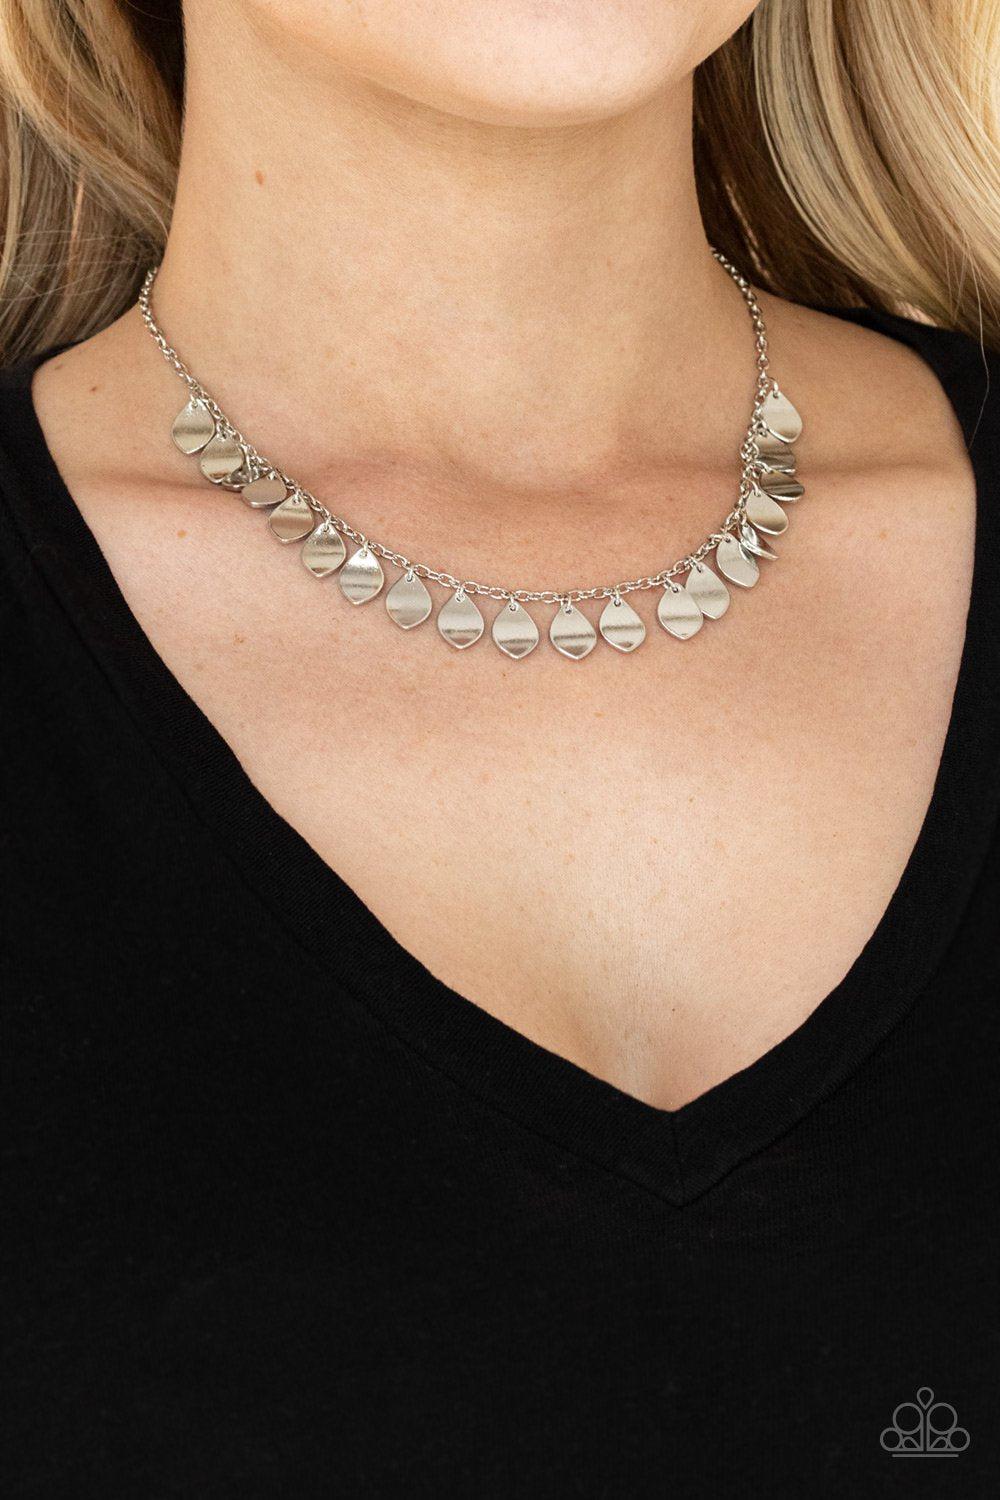 Dainty DISCovery Silver Necklace - Paparazzi Accessories- lightbox - CarasShop.com - $5 Jewelry by Cara Jewels